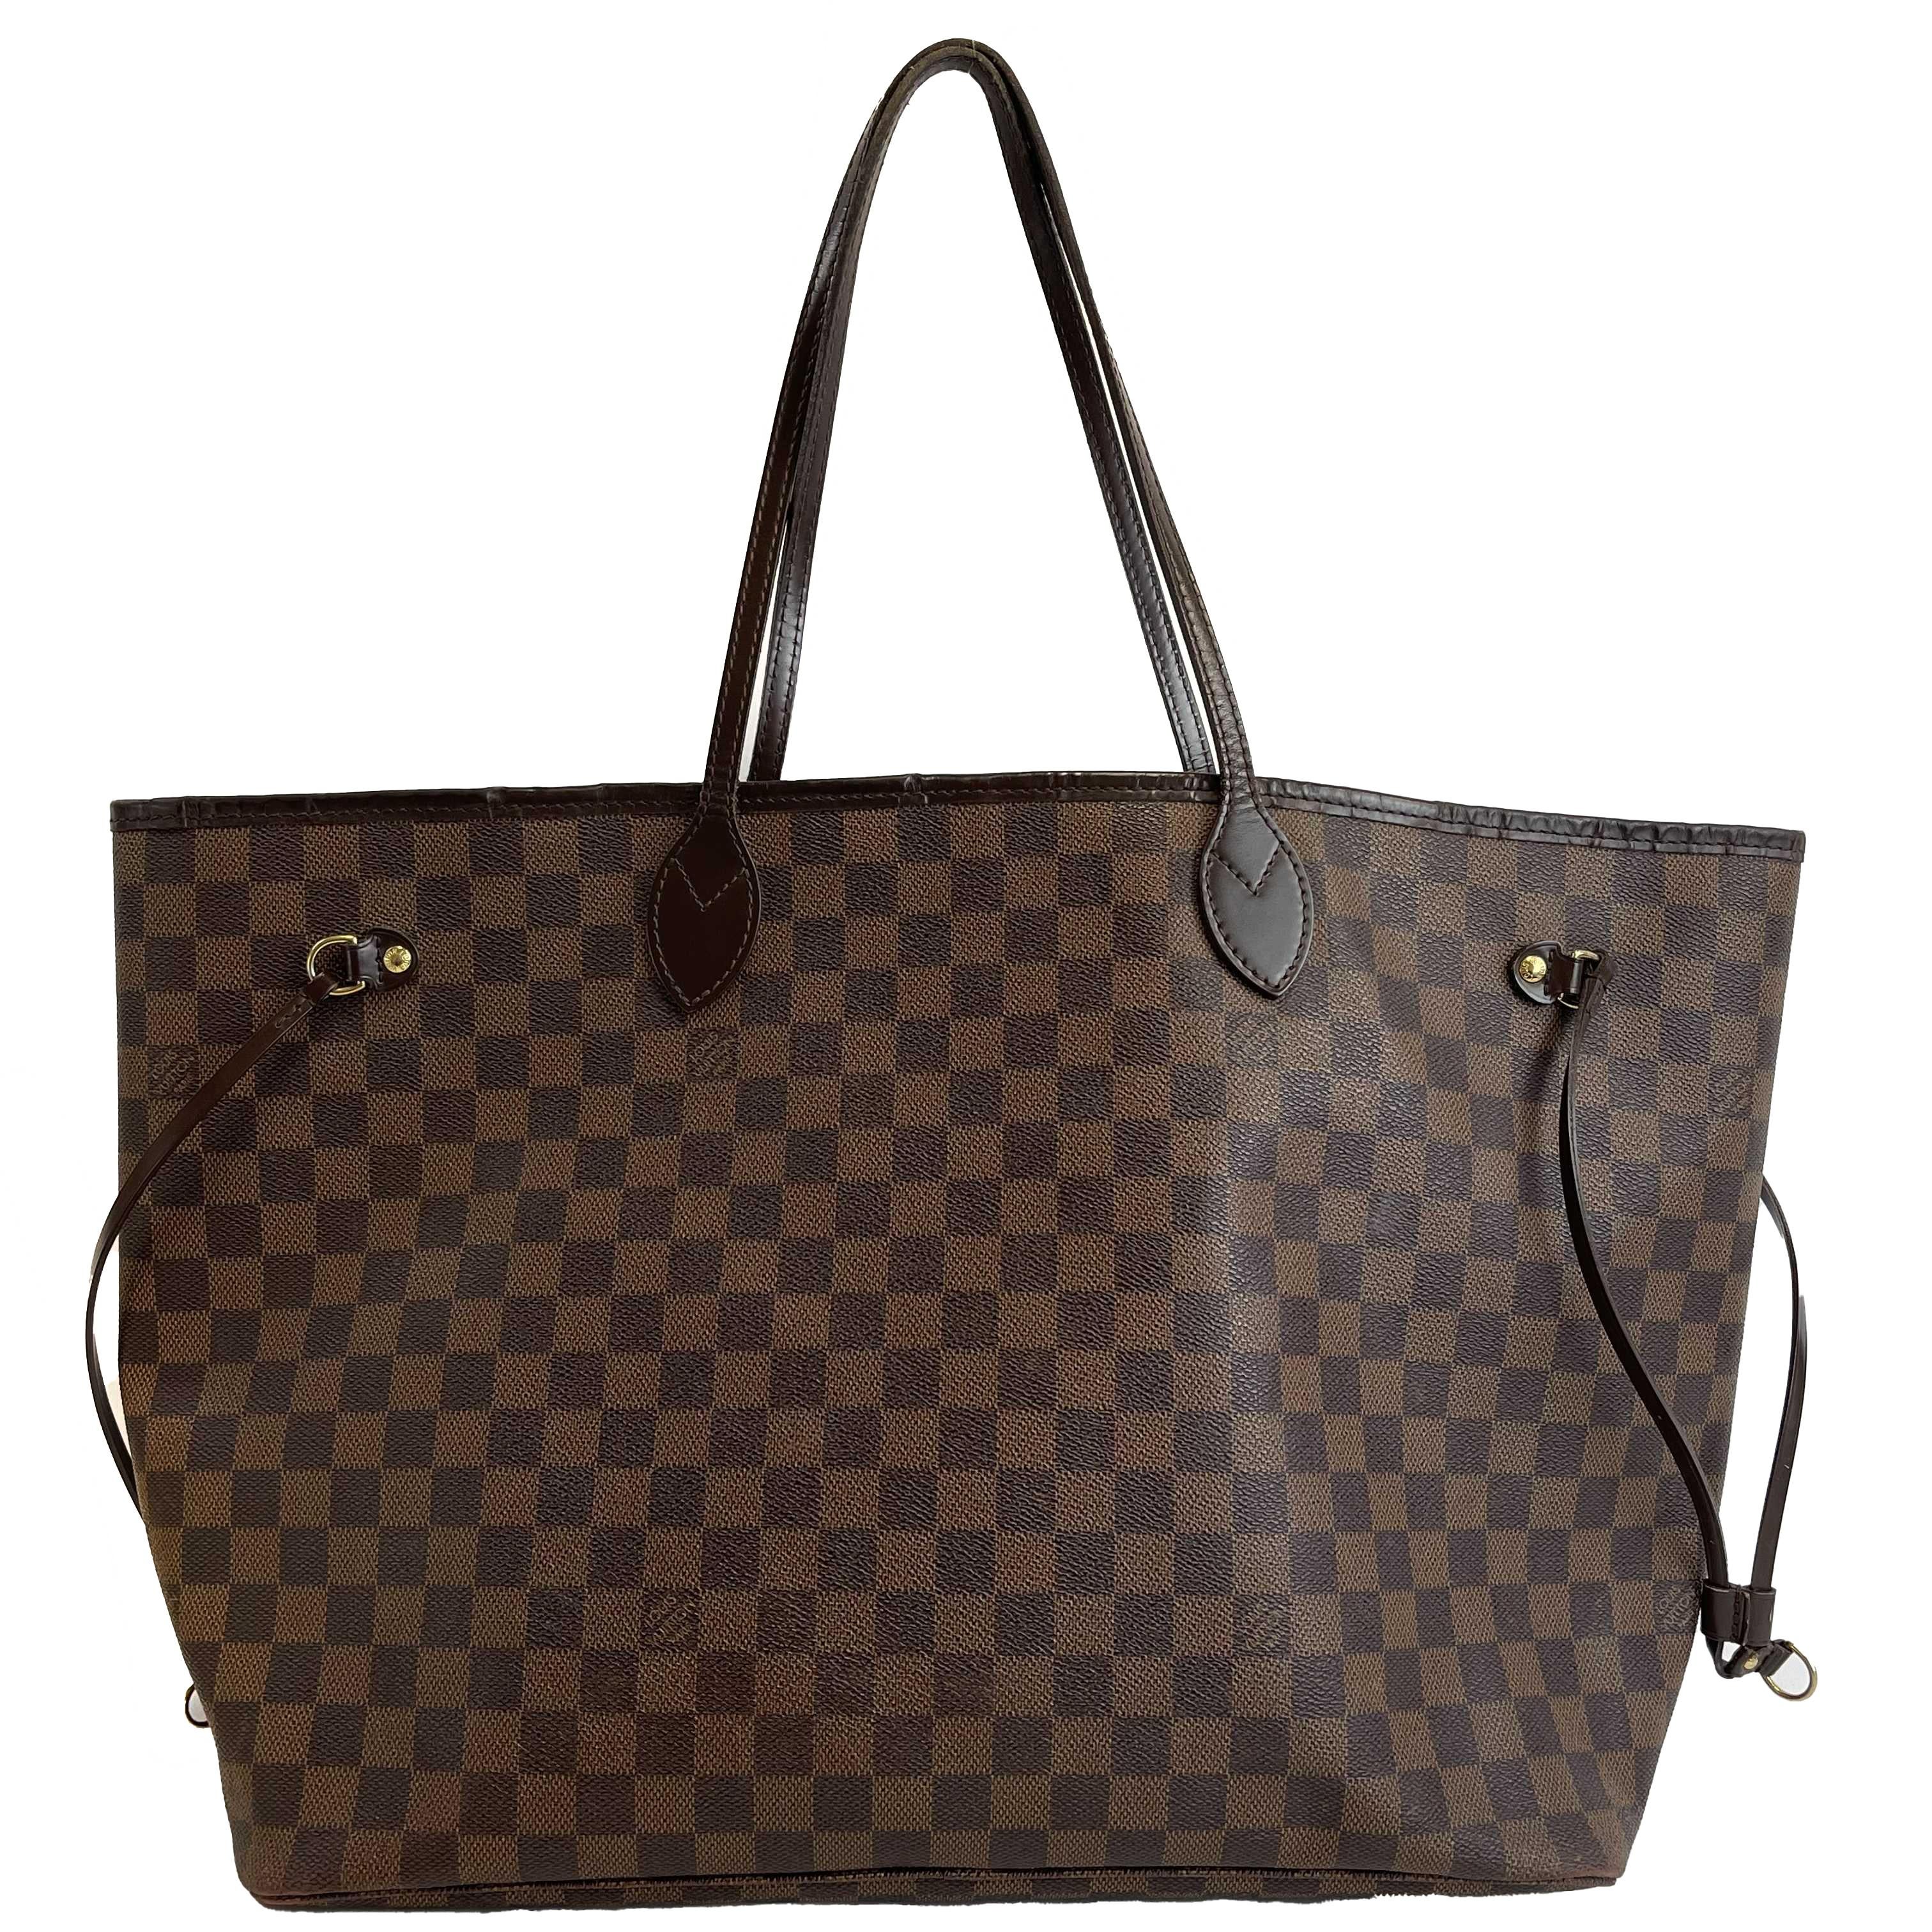 Louis Vuitton - Damier Ebene Neverfull GM - Brown Tote
Measurements

Width: 21 in / 53.34 cm
Height: 13 in / 33.02 cm
Depth: 7.9 in / 20.066 cm
Handle Drop: 9 in / 22.86 cm
Details

Made In: France
Color: Brown
Accessories: Dust Bag
Material: Coated